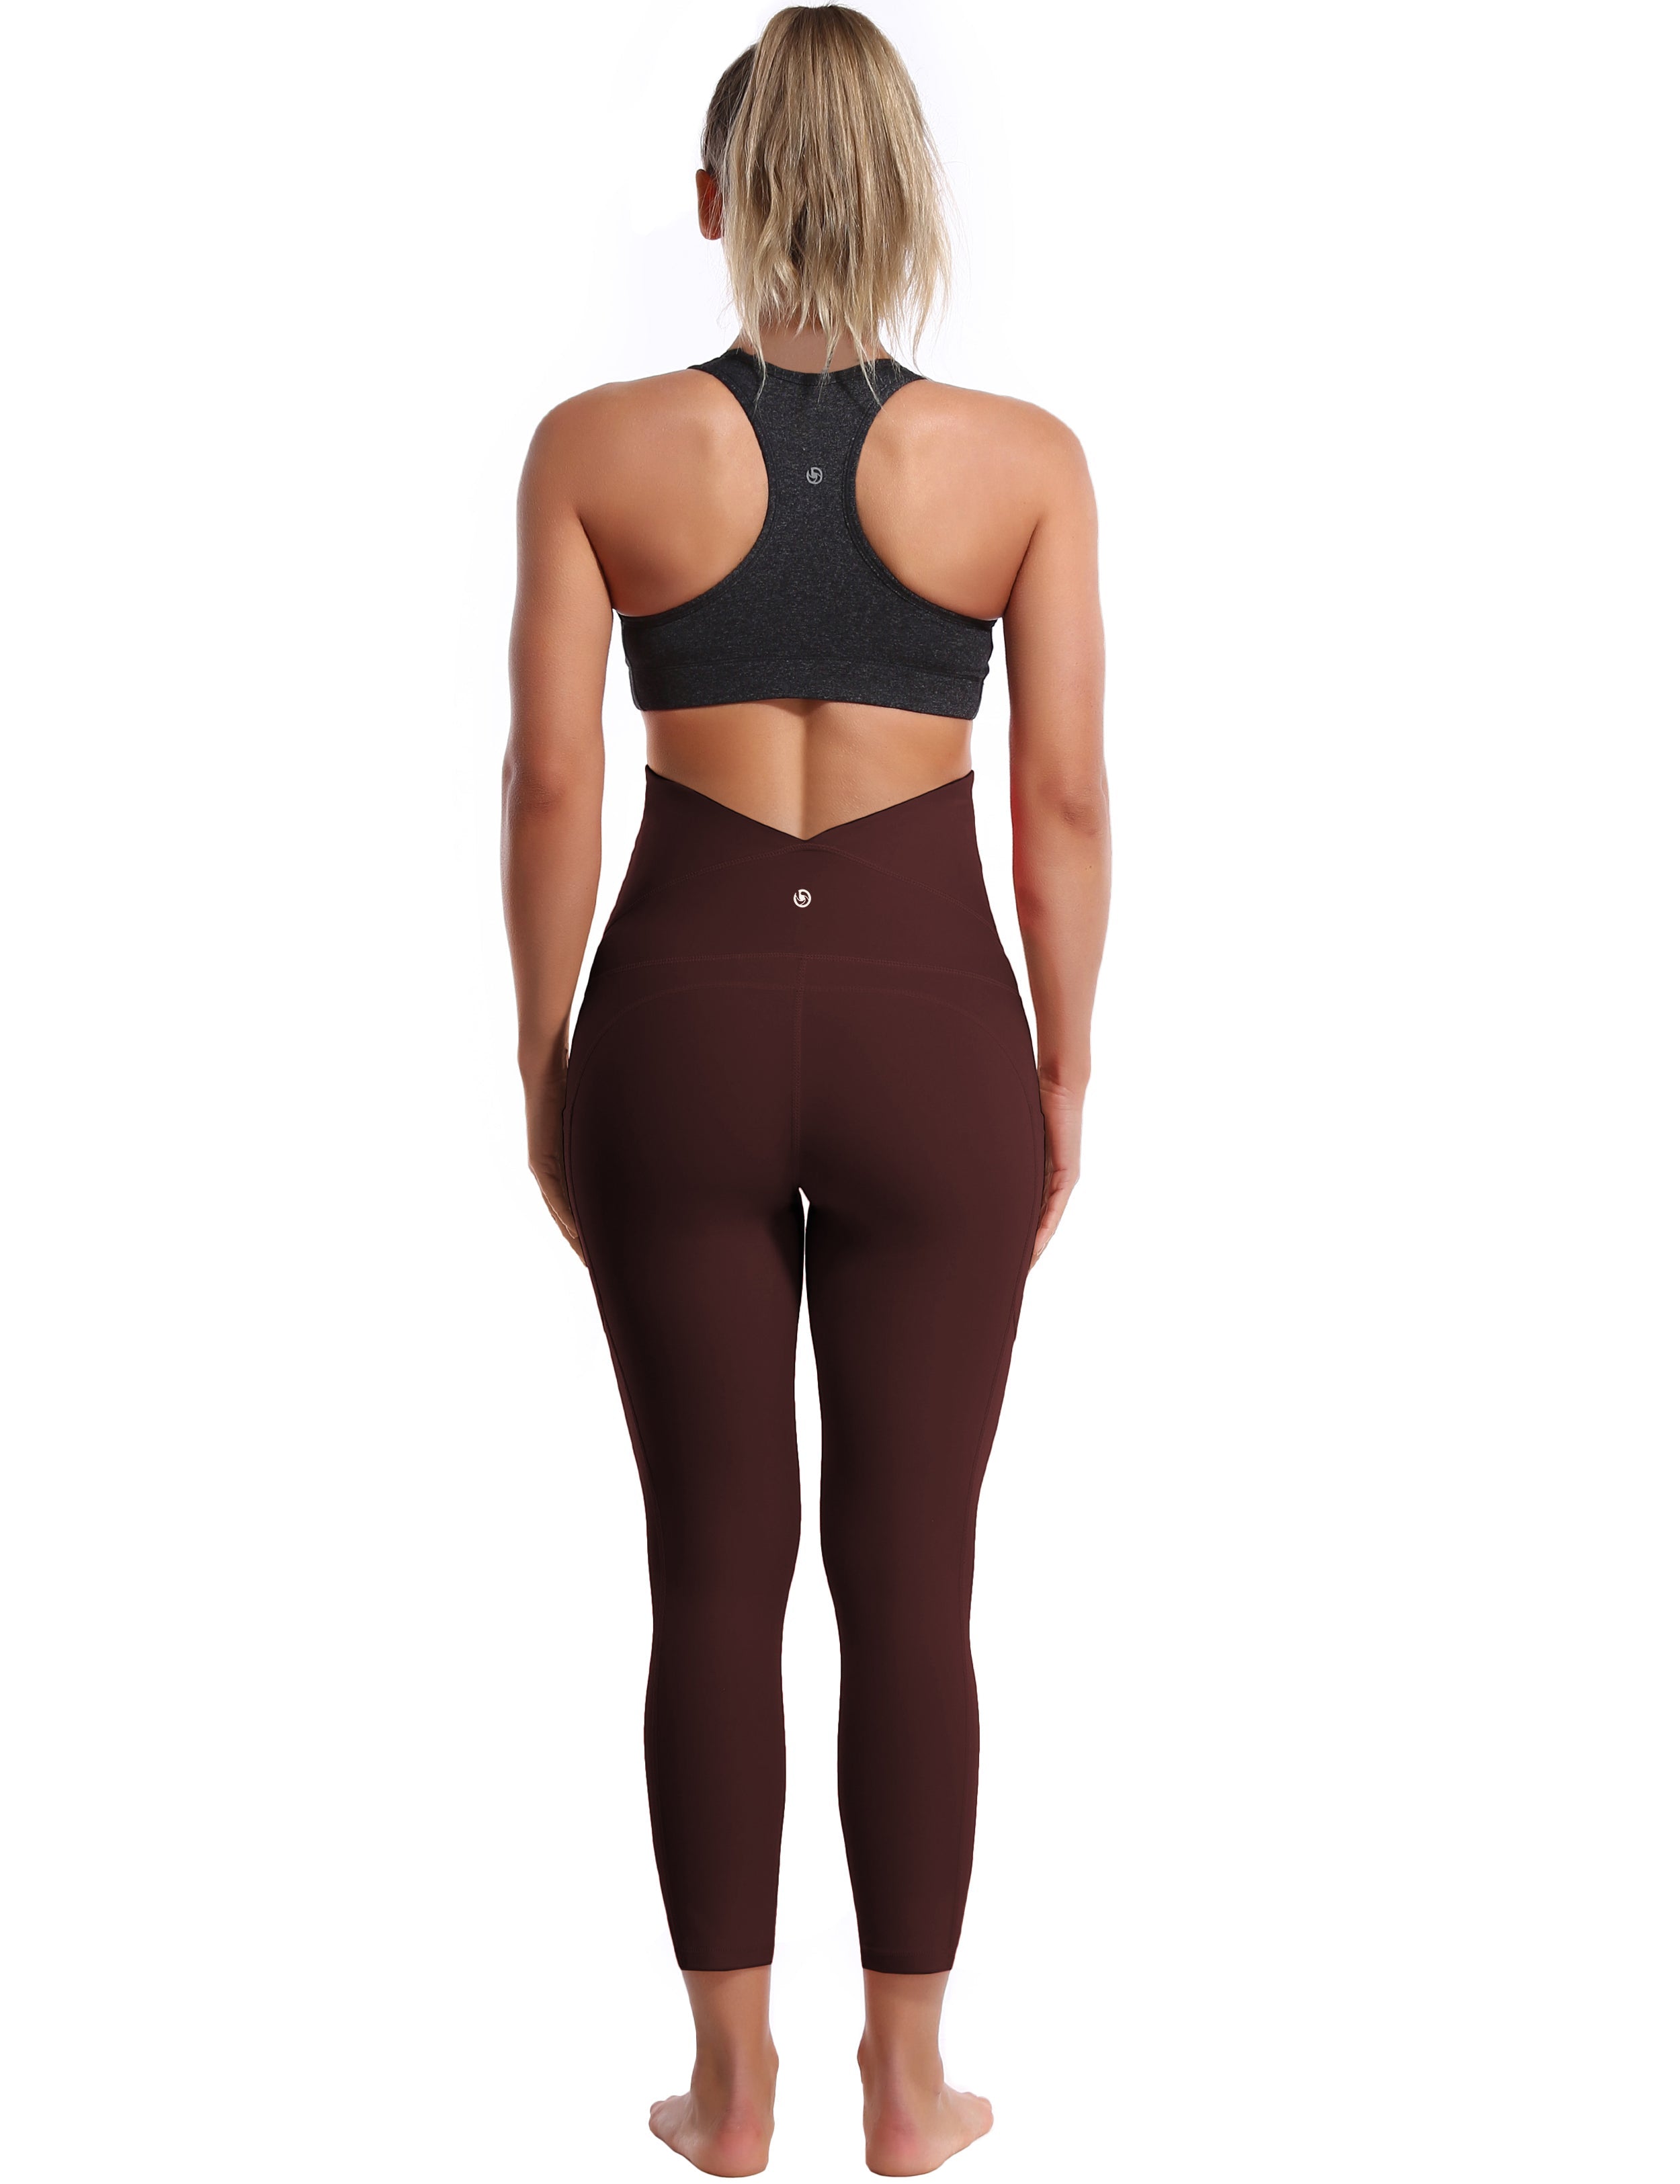 22" Side Pockets Maternity Yoga Pants mahoganymaroon 87%Nylon/13%Spandex Softest-ever fabric High elasticity 4-way stretch Fabric doesn't attract lint easily No see-through Moisture-wicking Machine wash